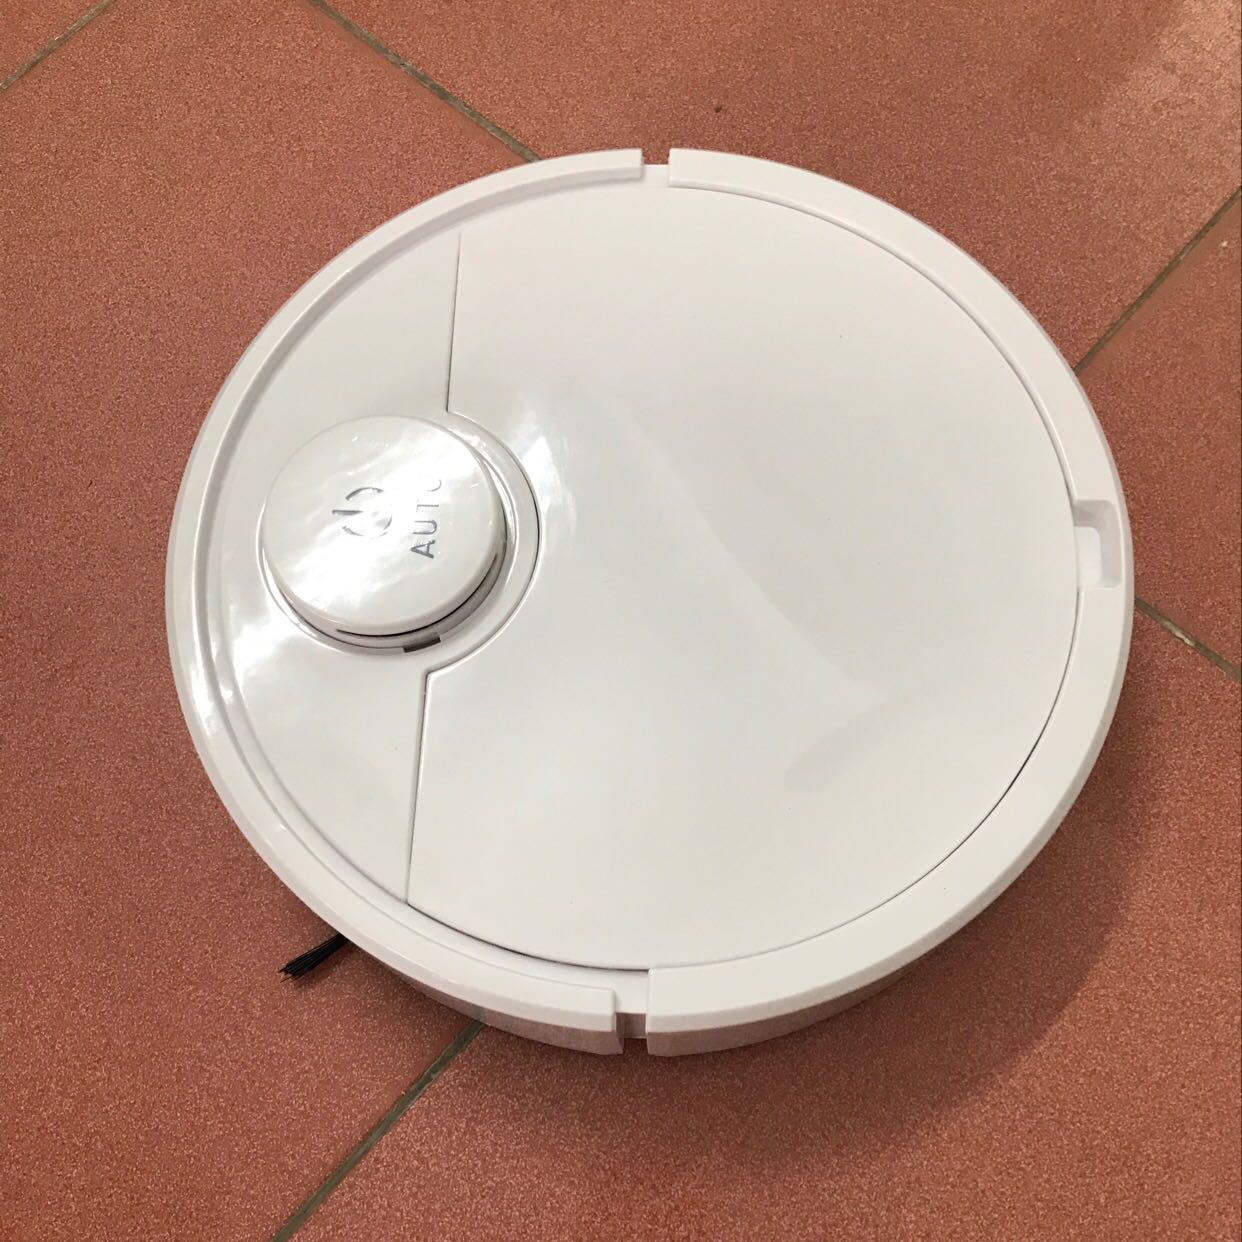 3-in-1 Large Automatic Robot Vacuum Cleaner with Self-Charging Feature photo review